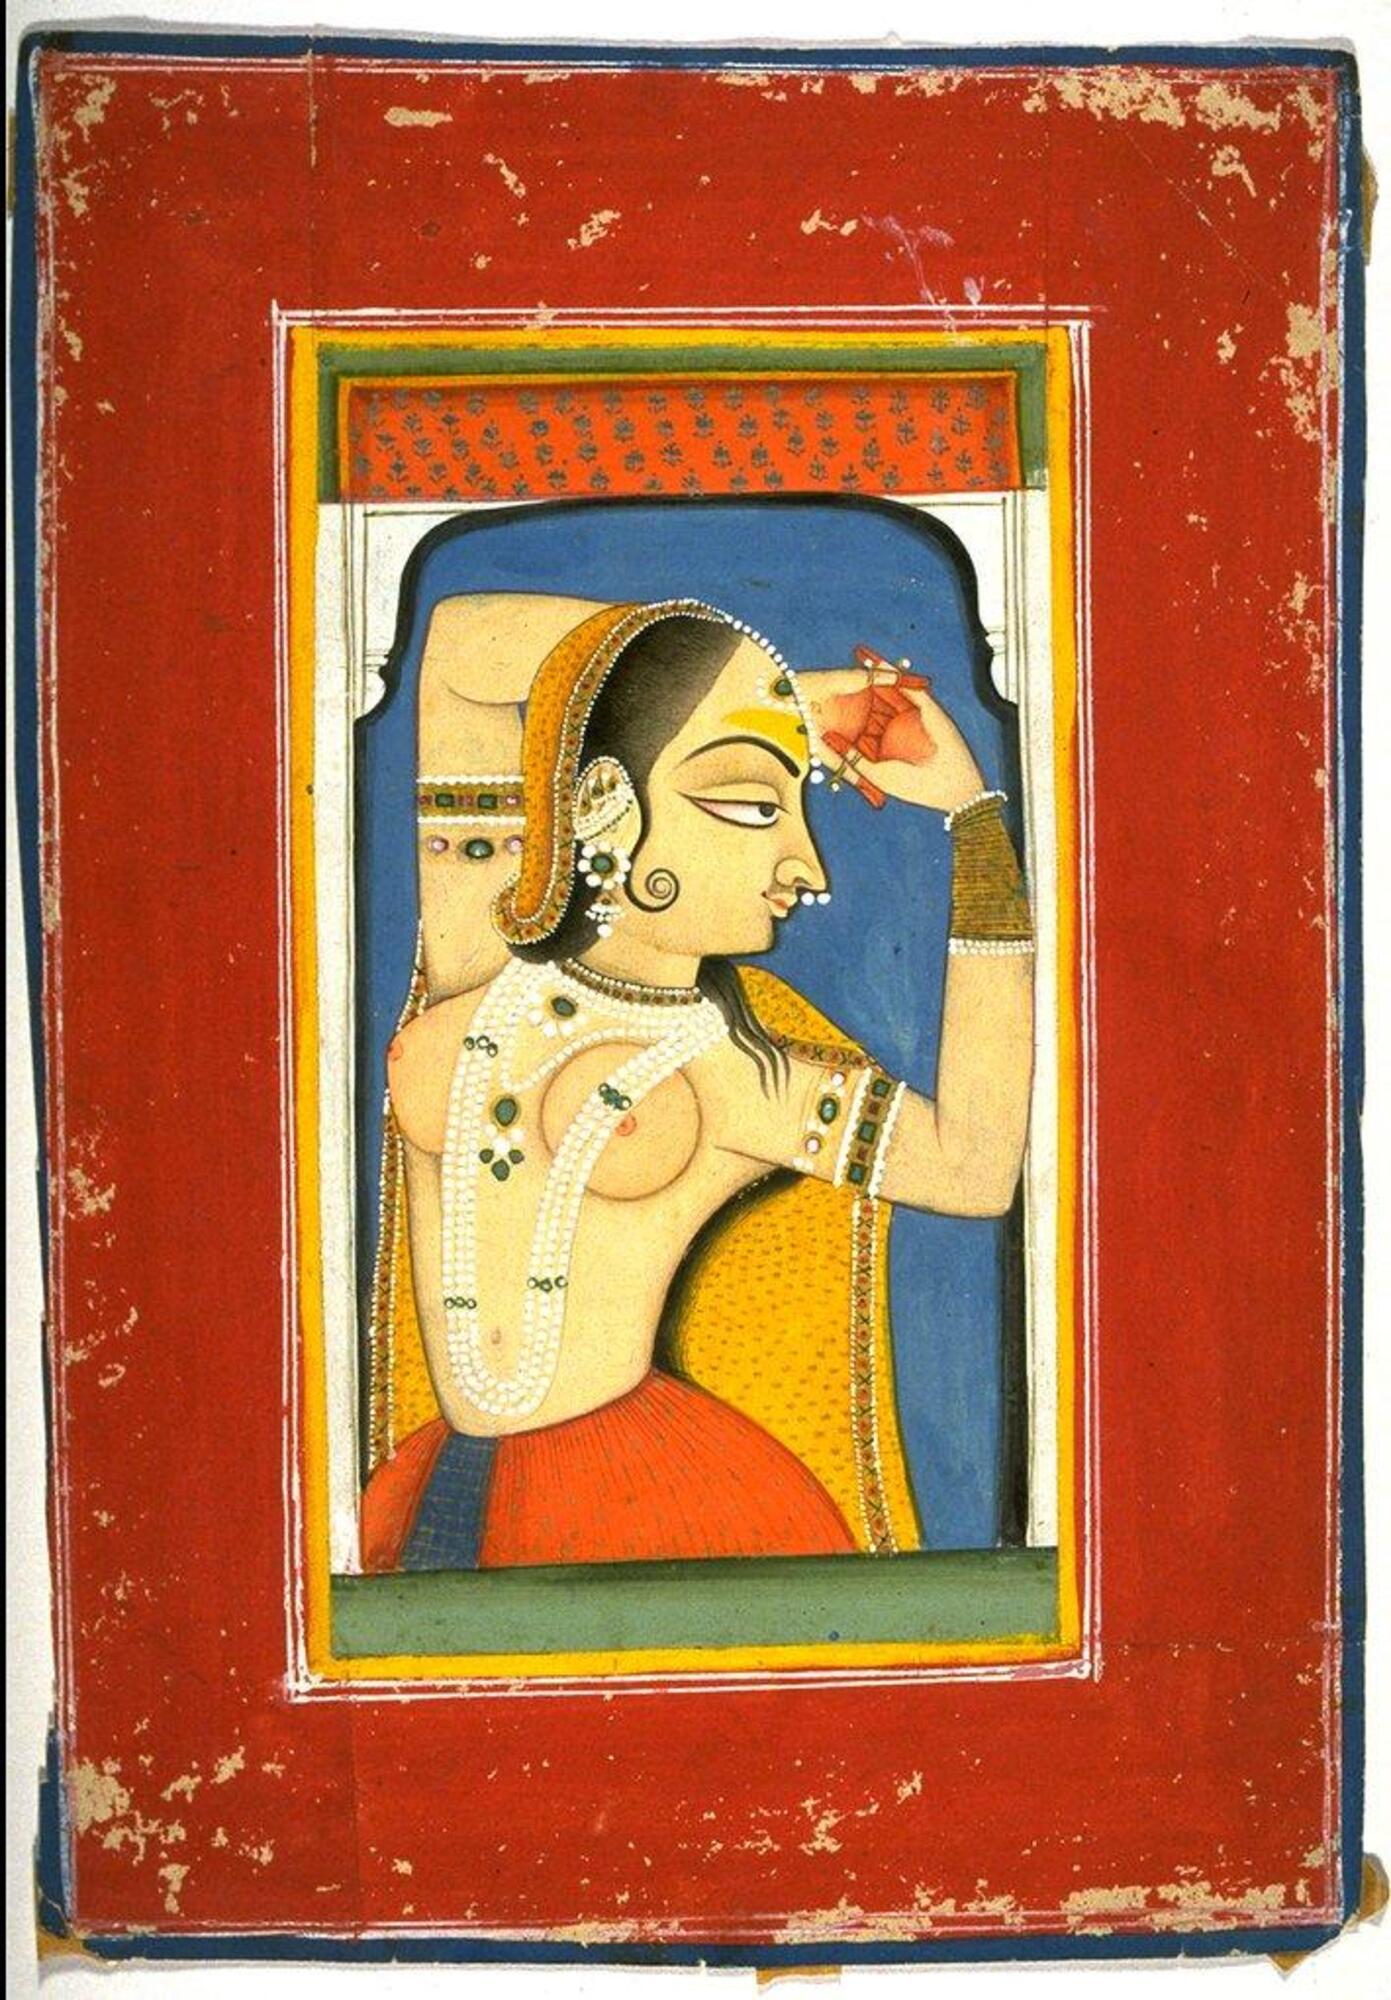 A bejewelled nayika holds an amorous pose. The portrait is focused on her upper body and side face.